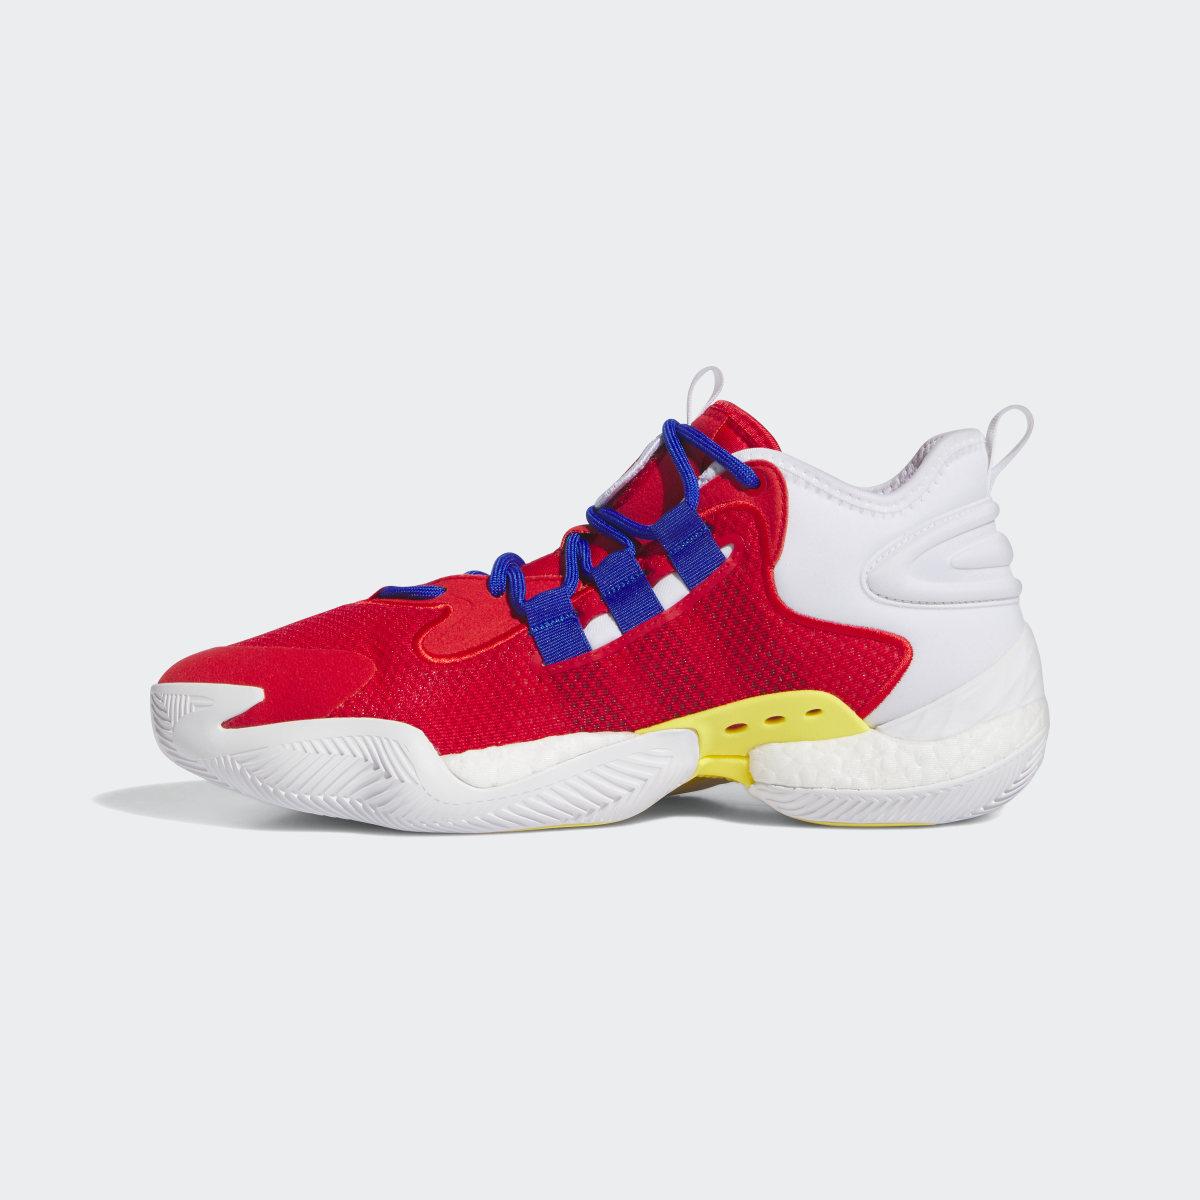 Adidas BYW Select Shoes. 7